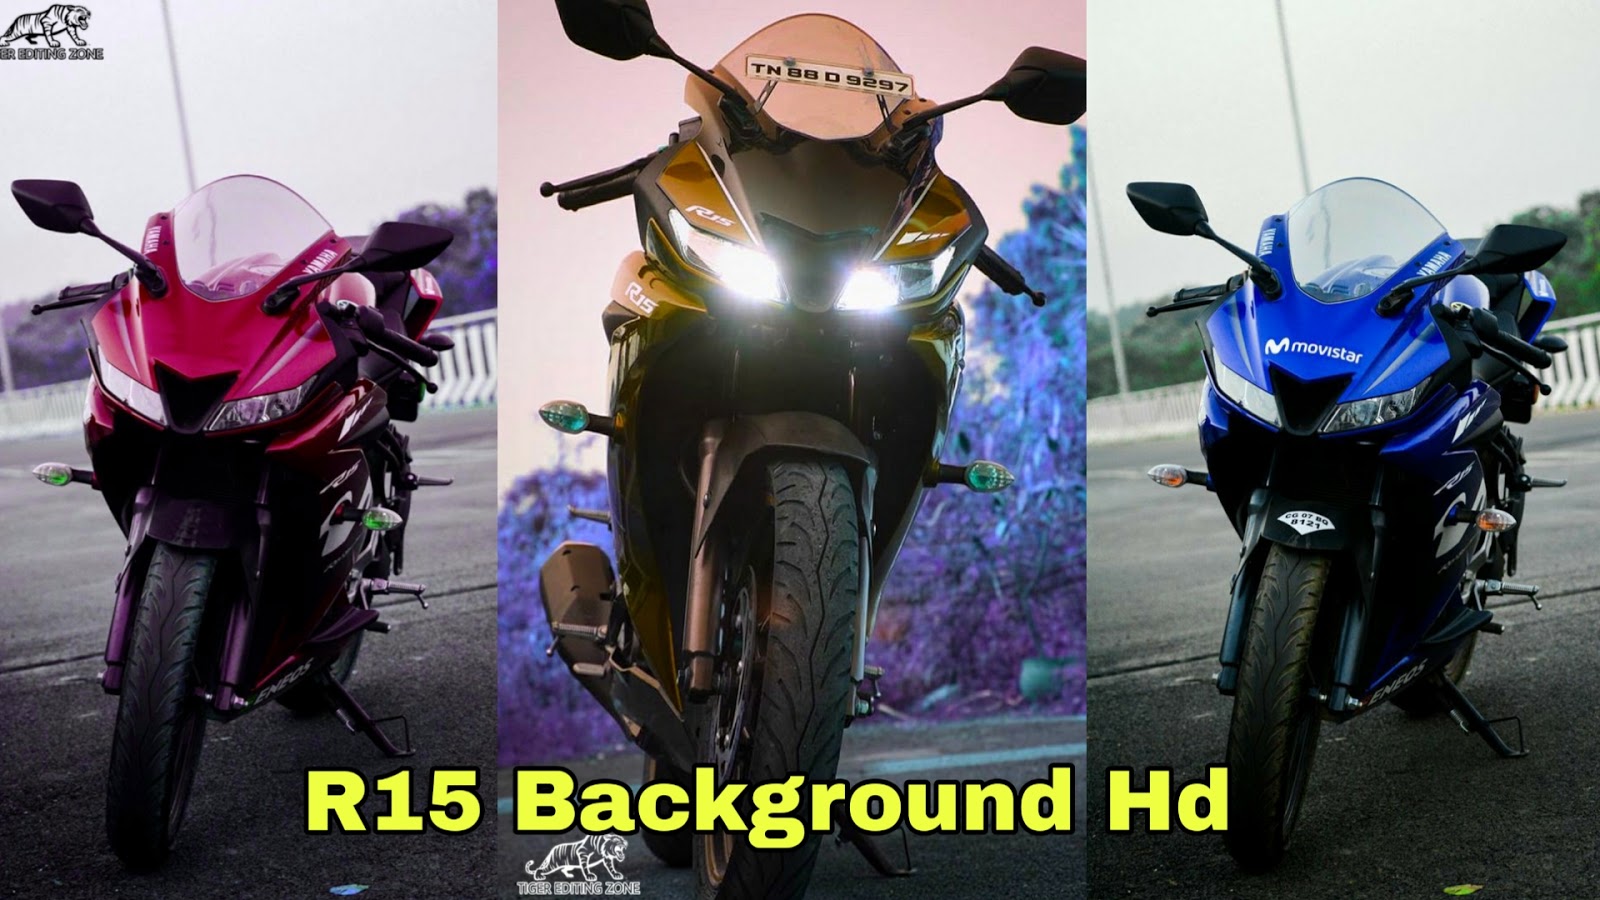 R15 Background Hd R15 Images Hd R15 Background For Editing